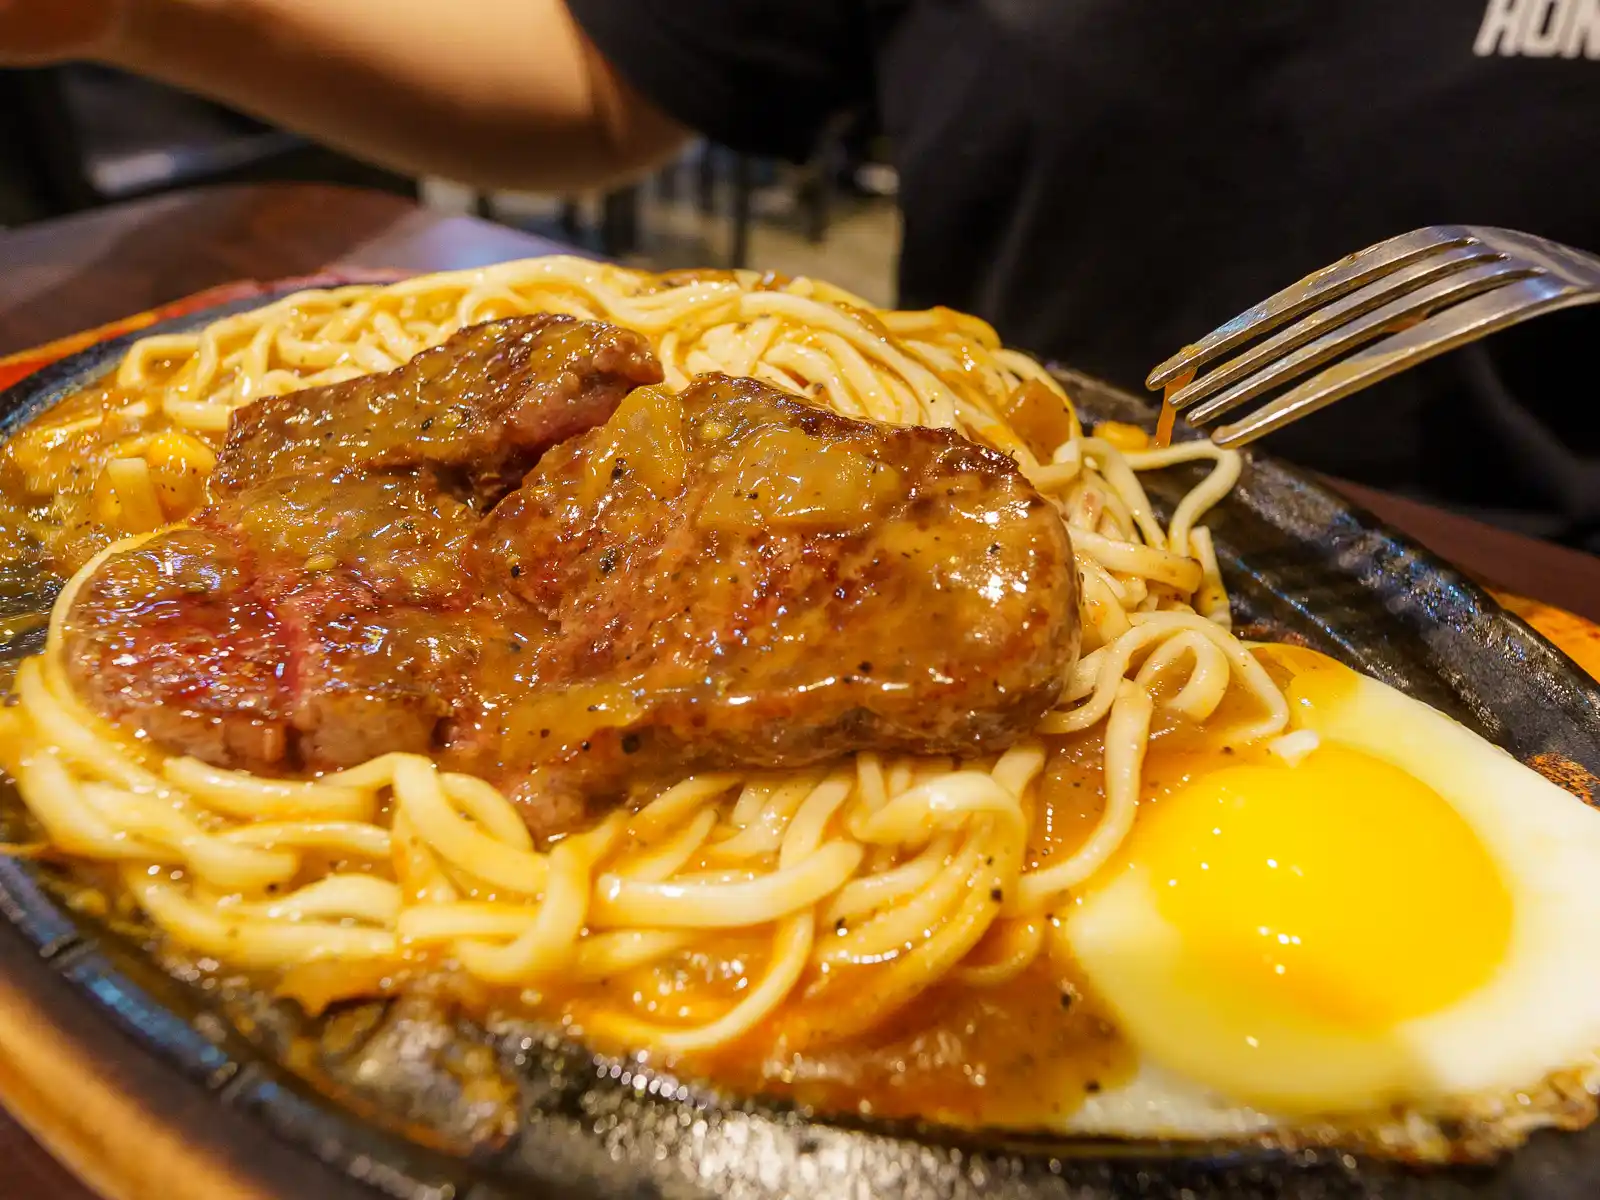 Steak, noodles, and one egg are served on a cast iron plate.